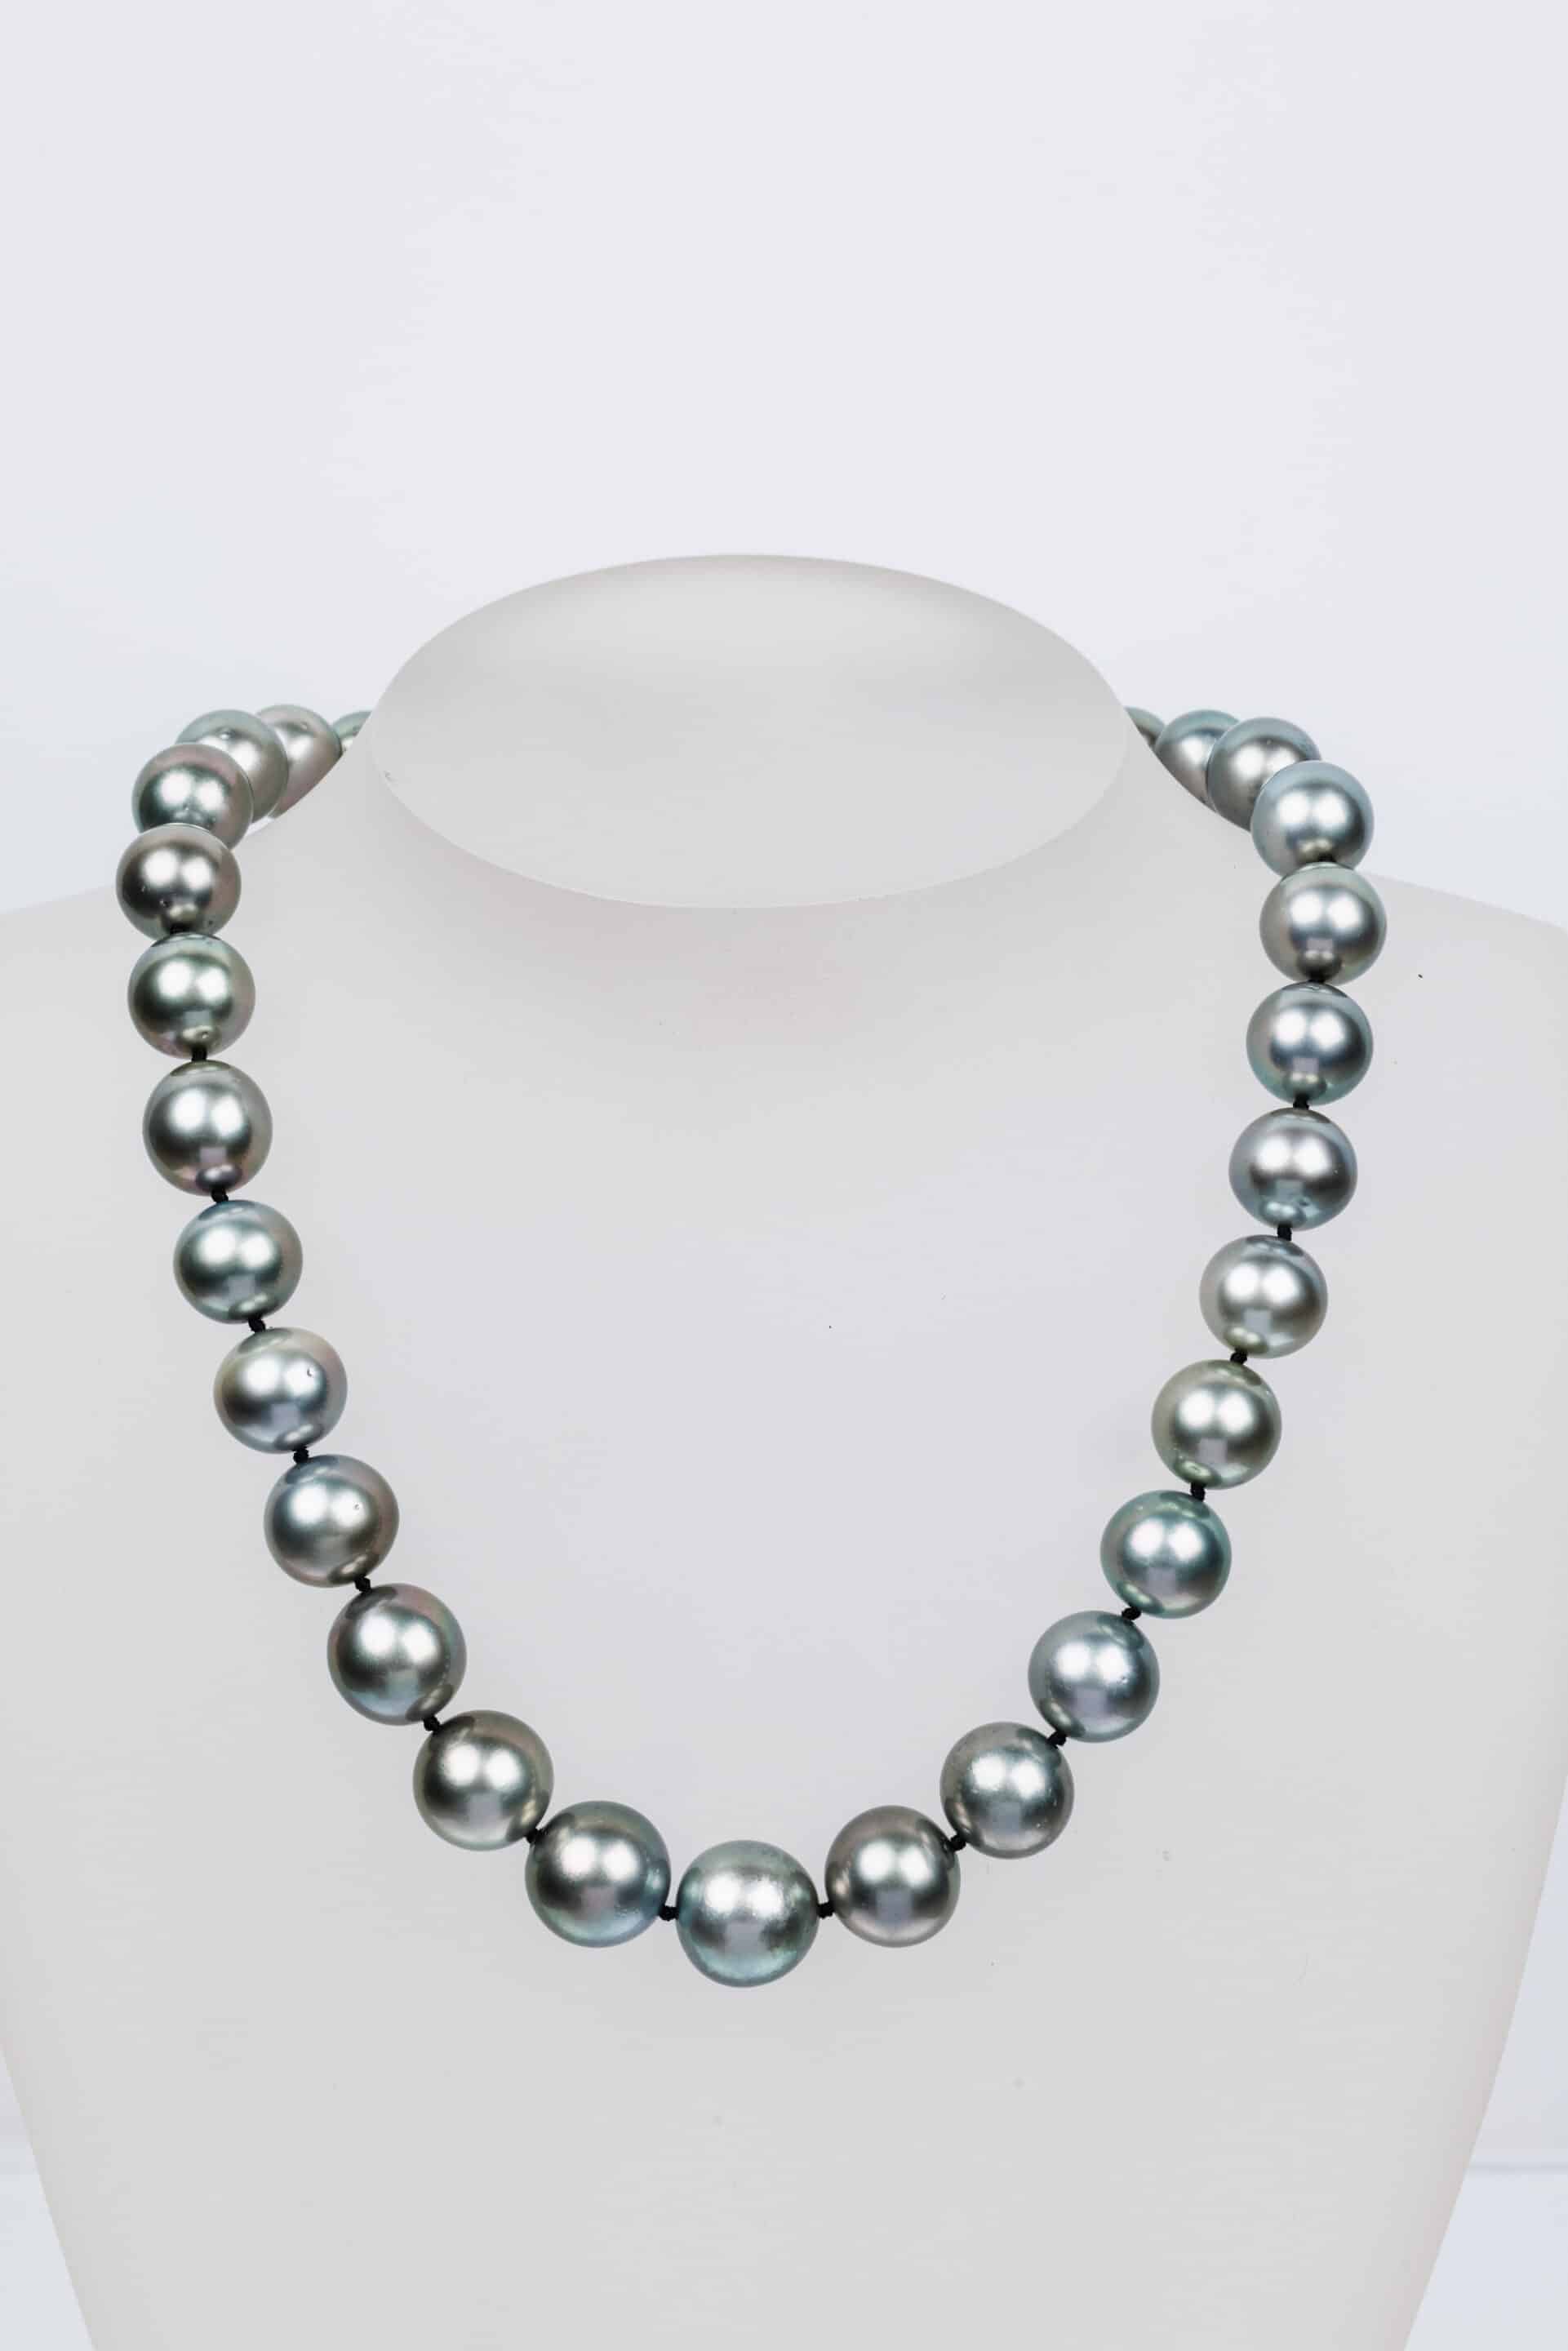 18ct White Gold Tahitian Pearl Necklace